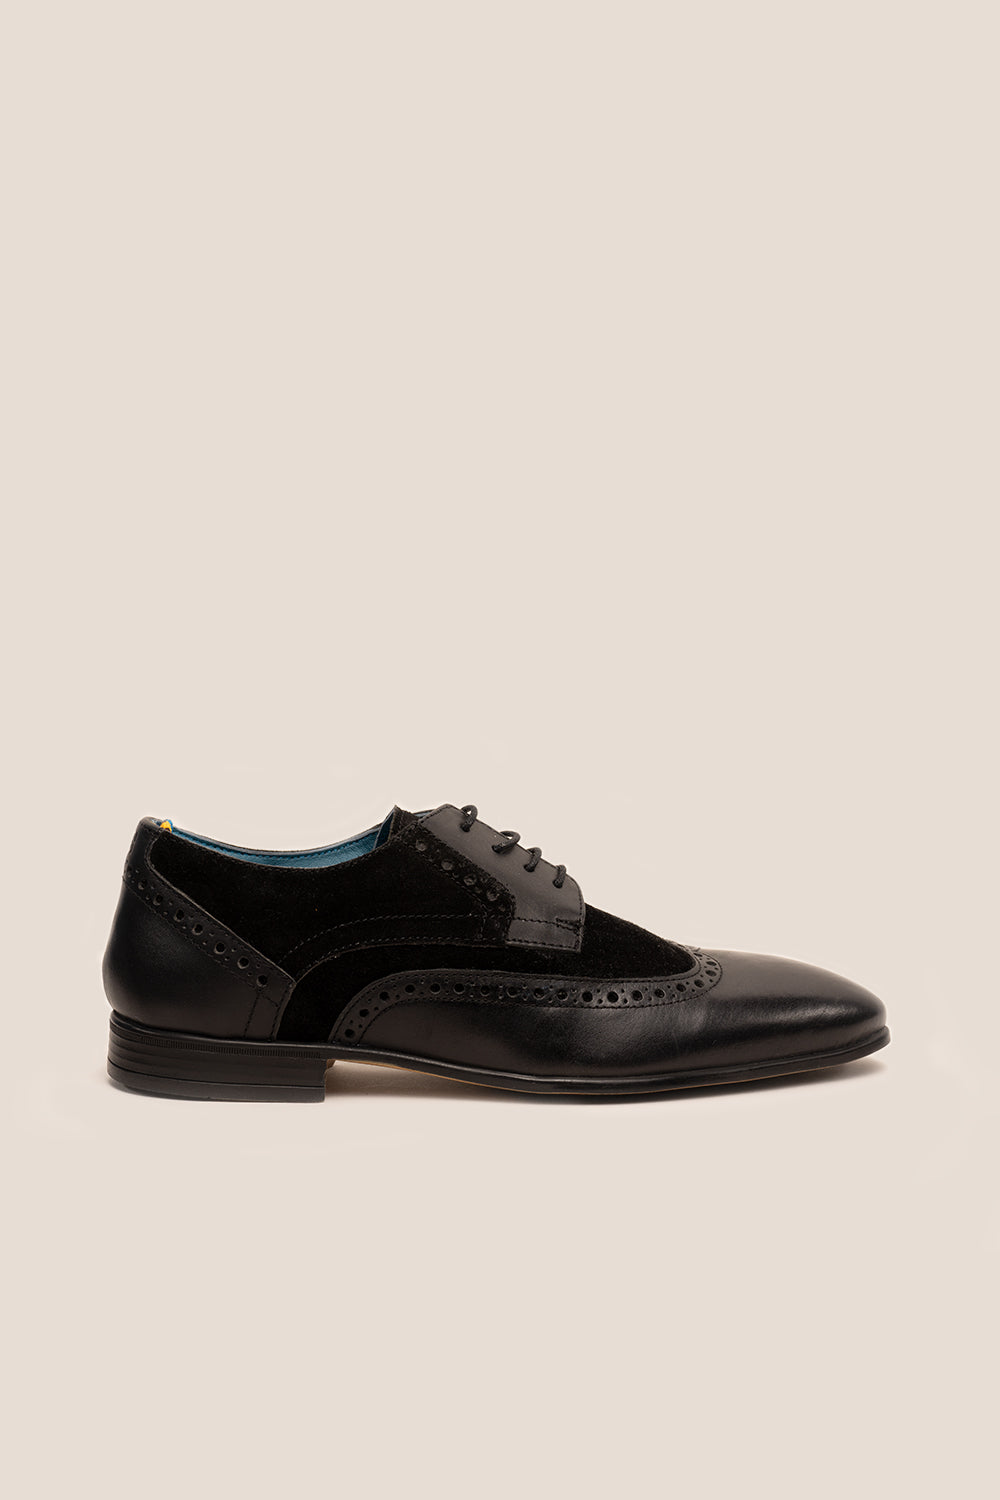 Miles Black Leather Mens Brogue Shoes | Office Wedding Derby | Oswin ...